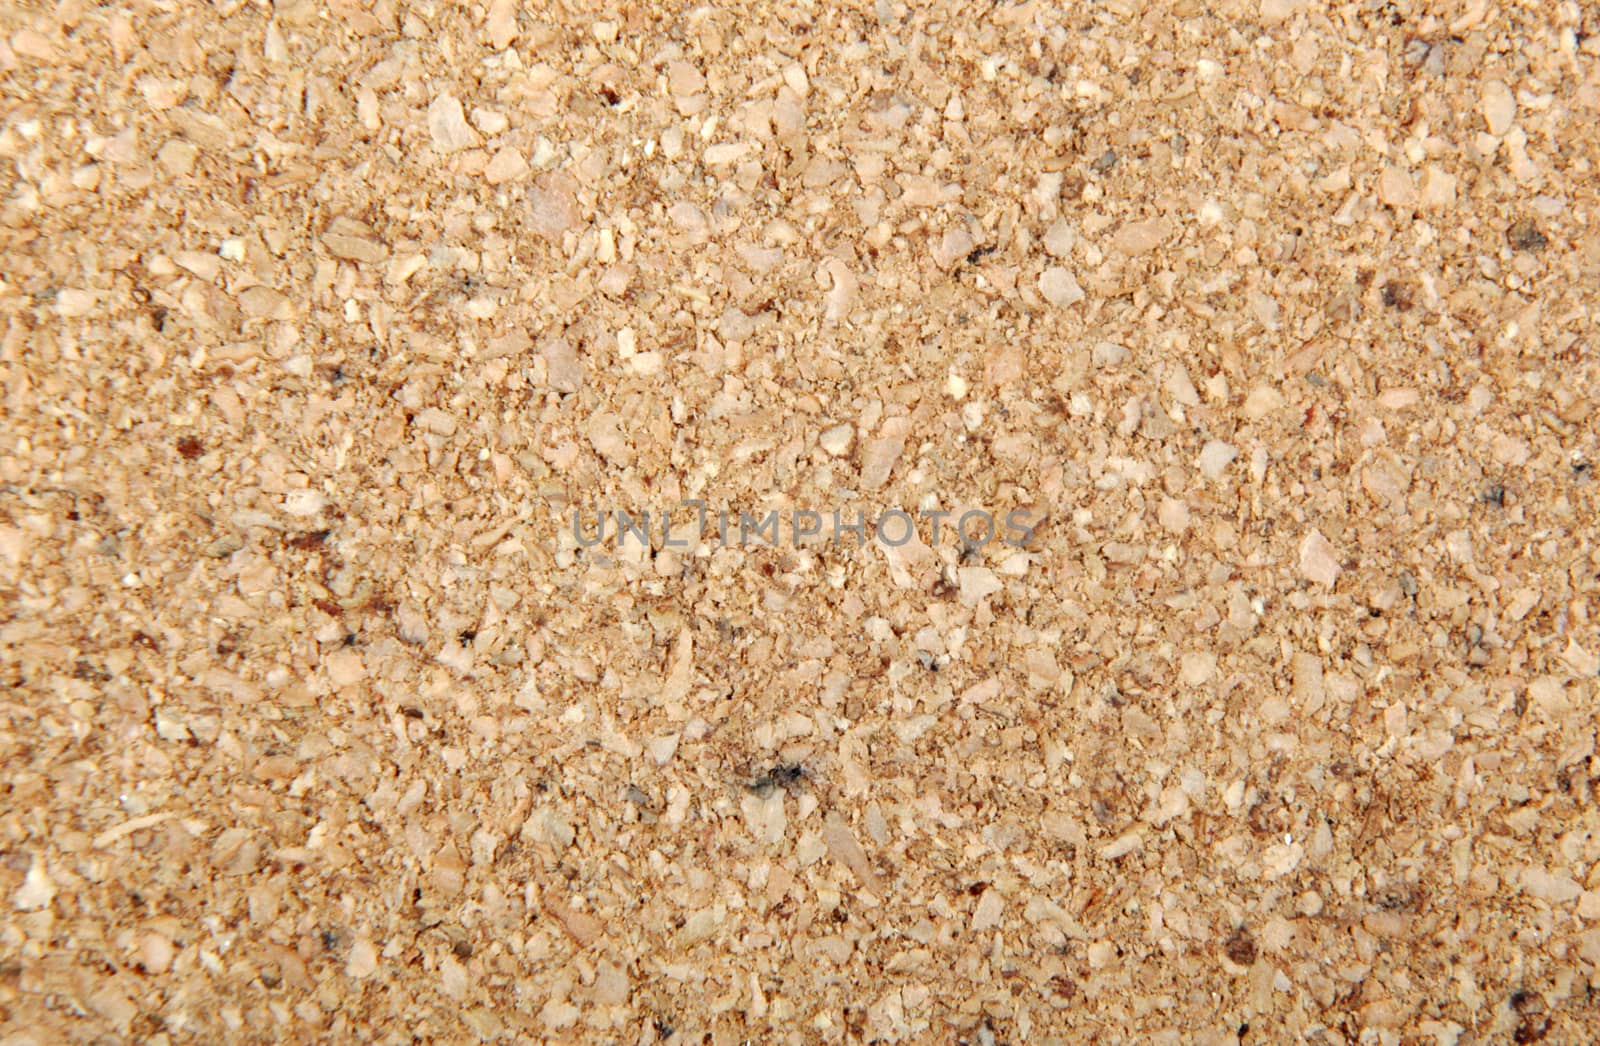 Close-Up Of Cork Texture Background